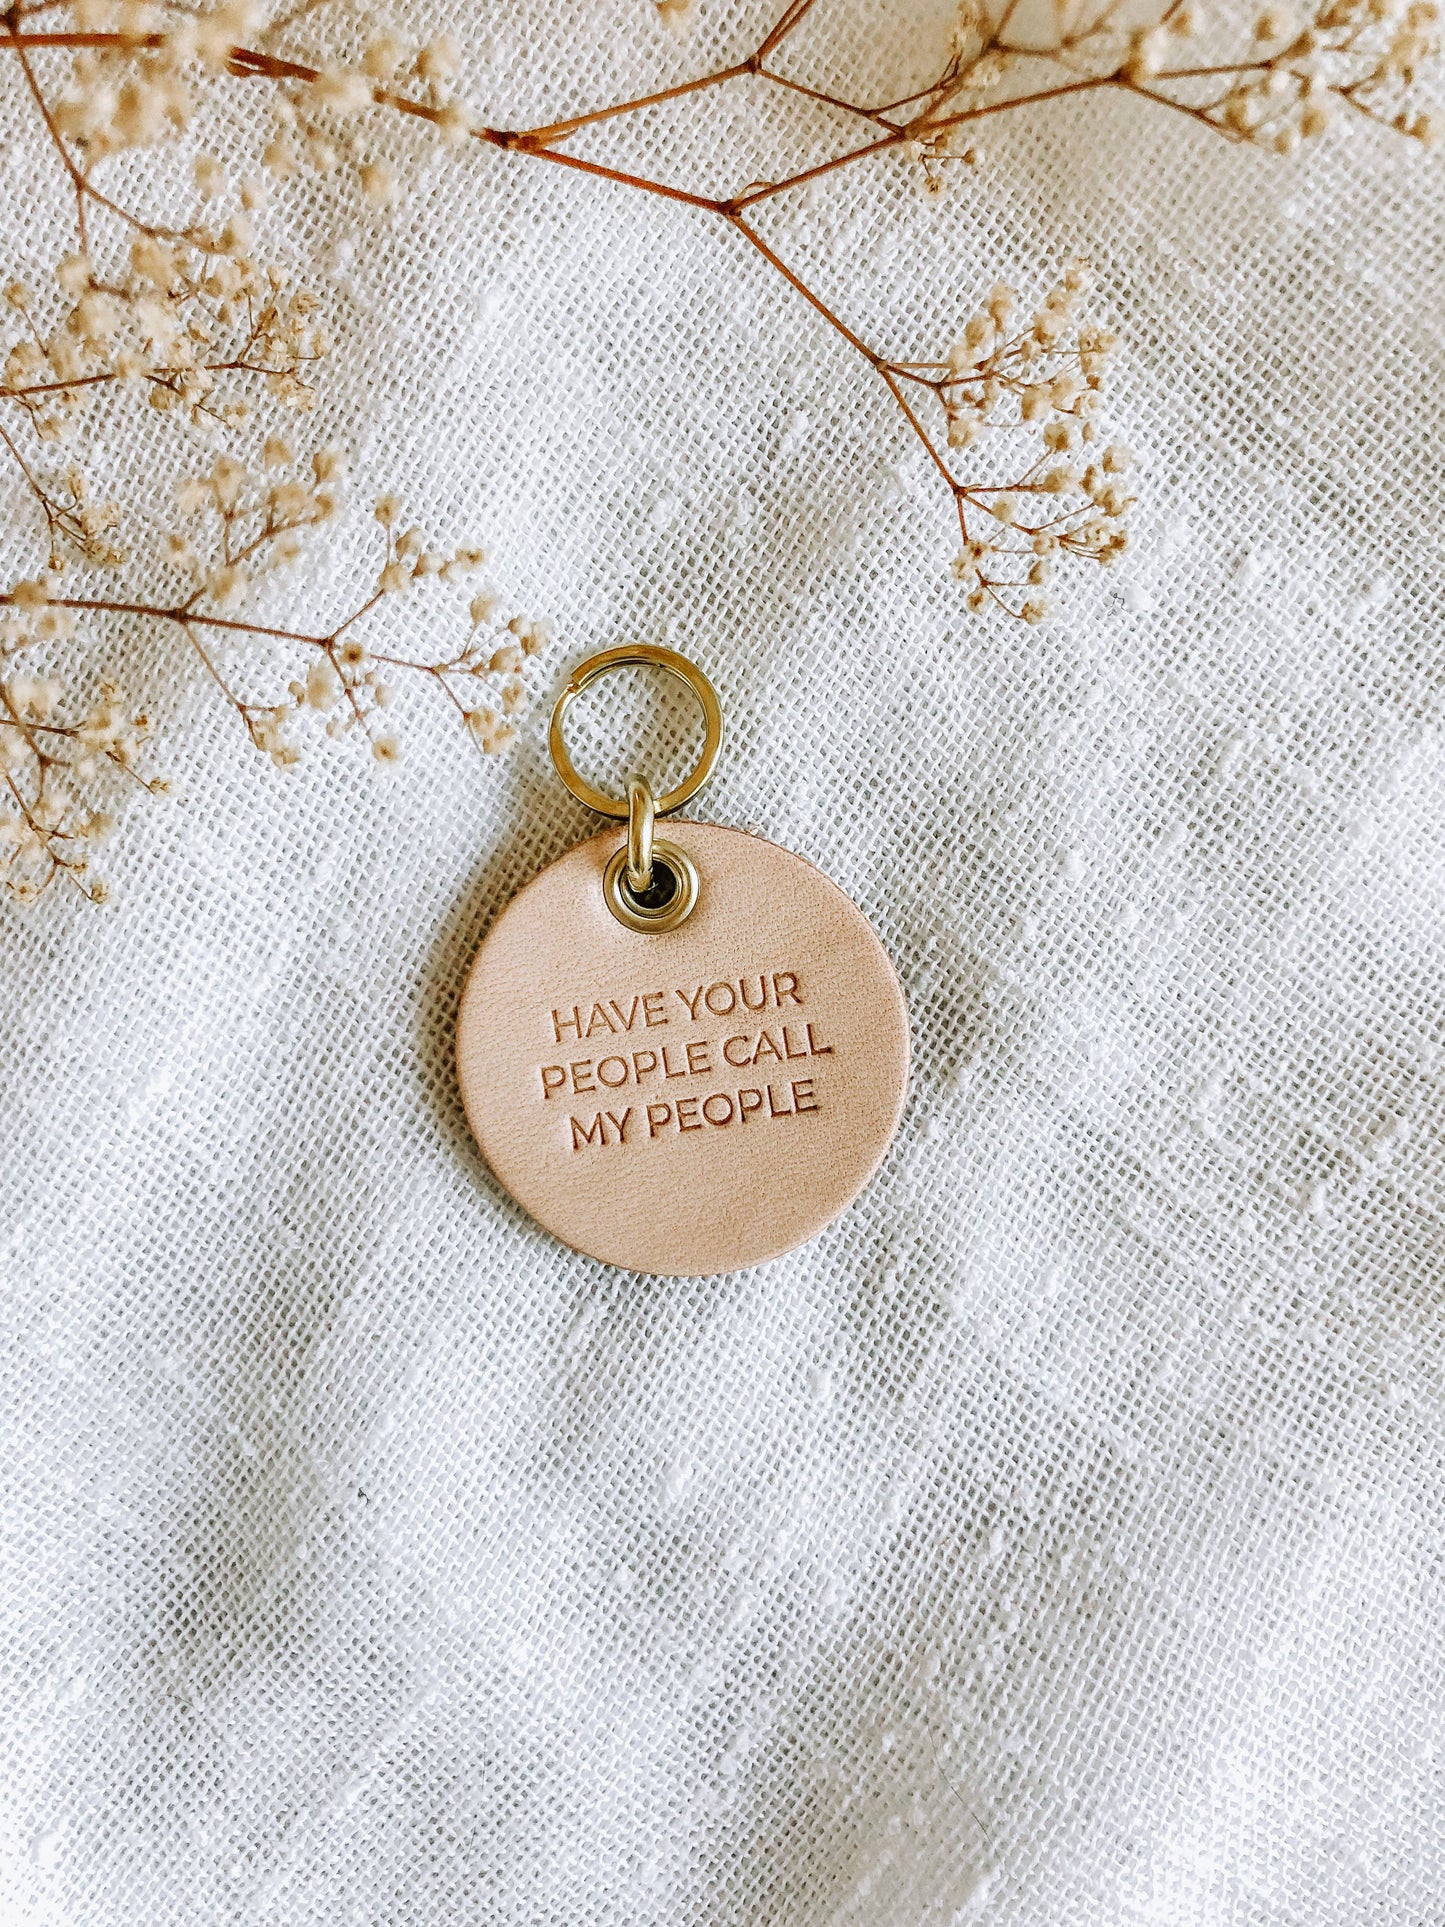 ‘Have Your People Call My People’ Leather Pet Collar Tag